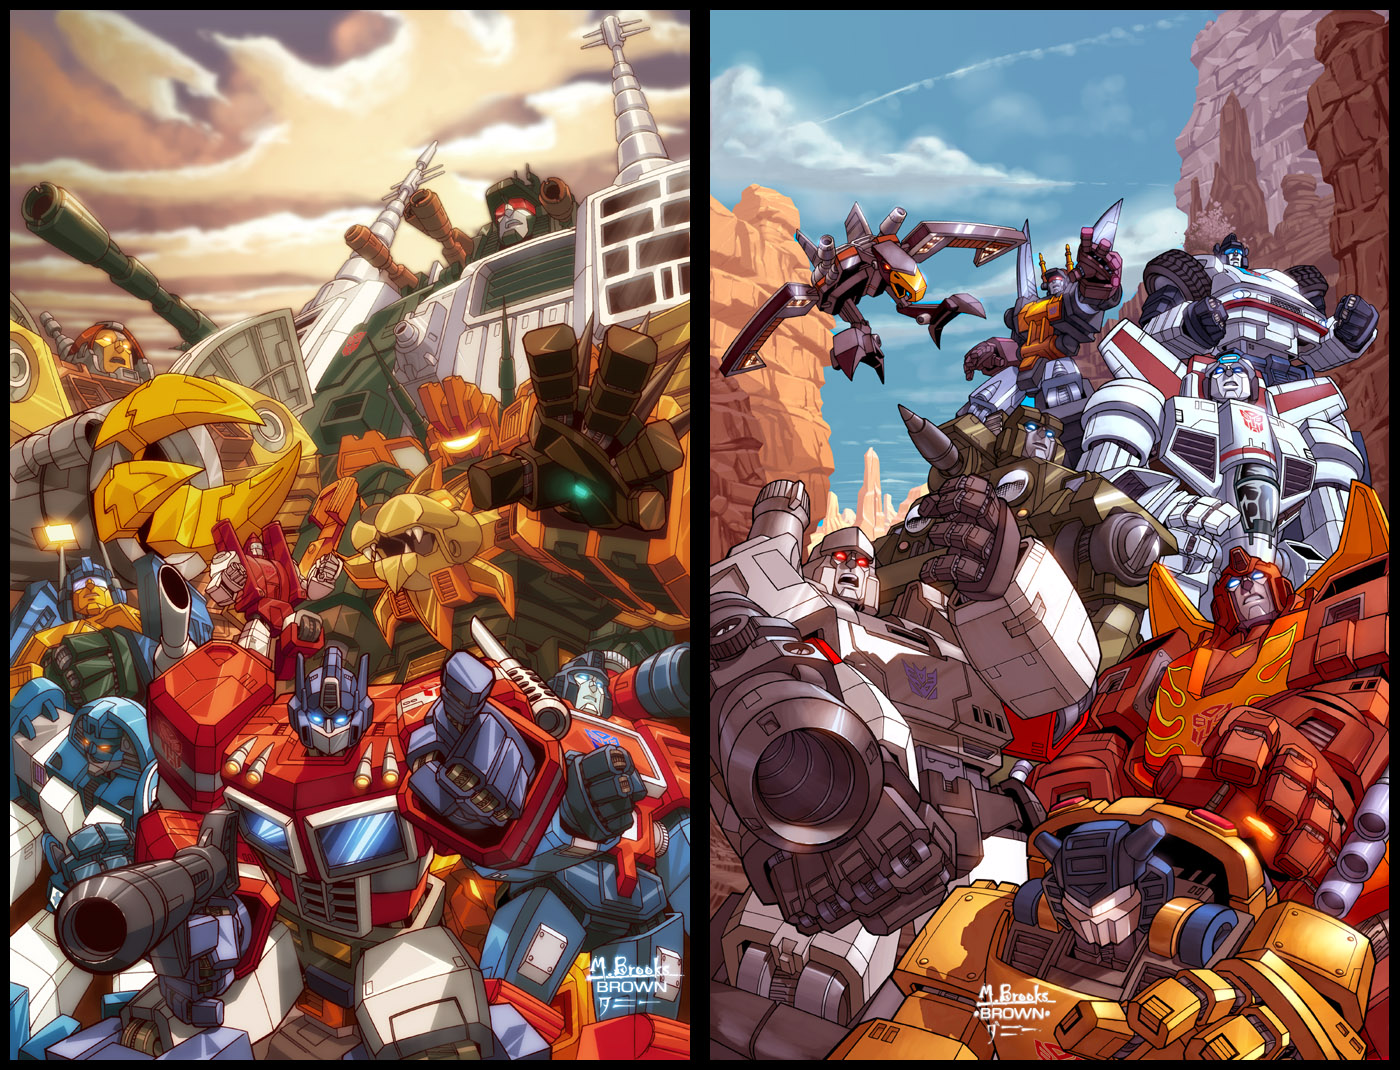 Transformers covers